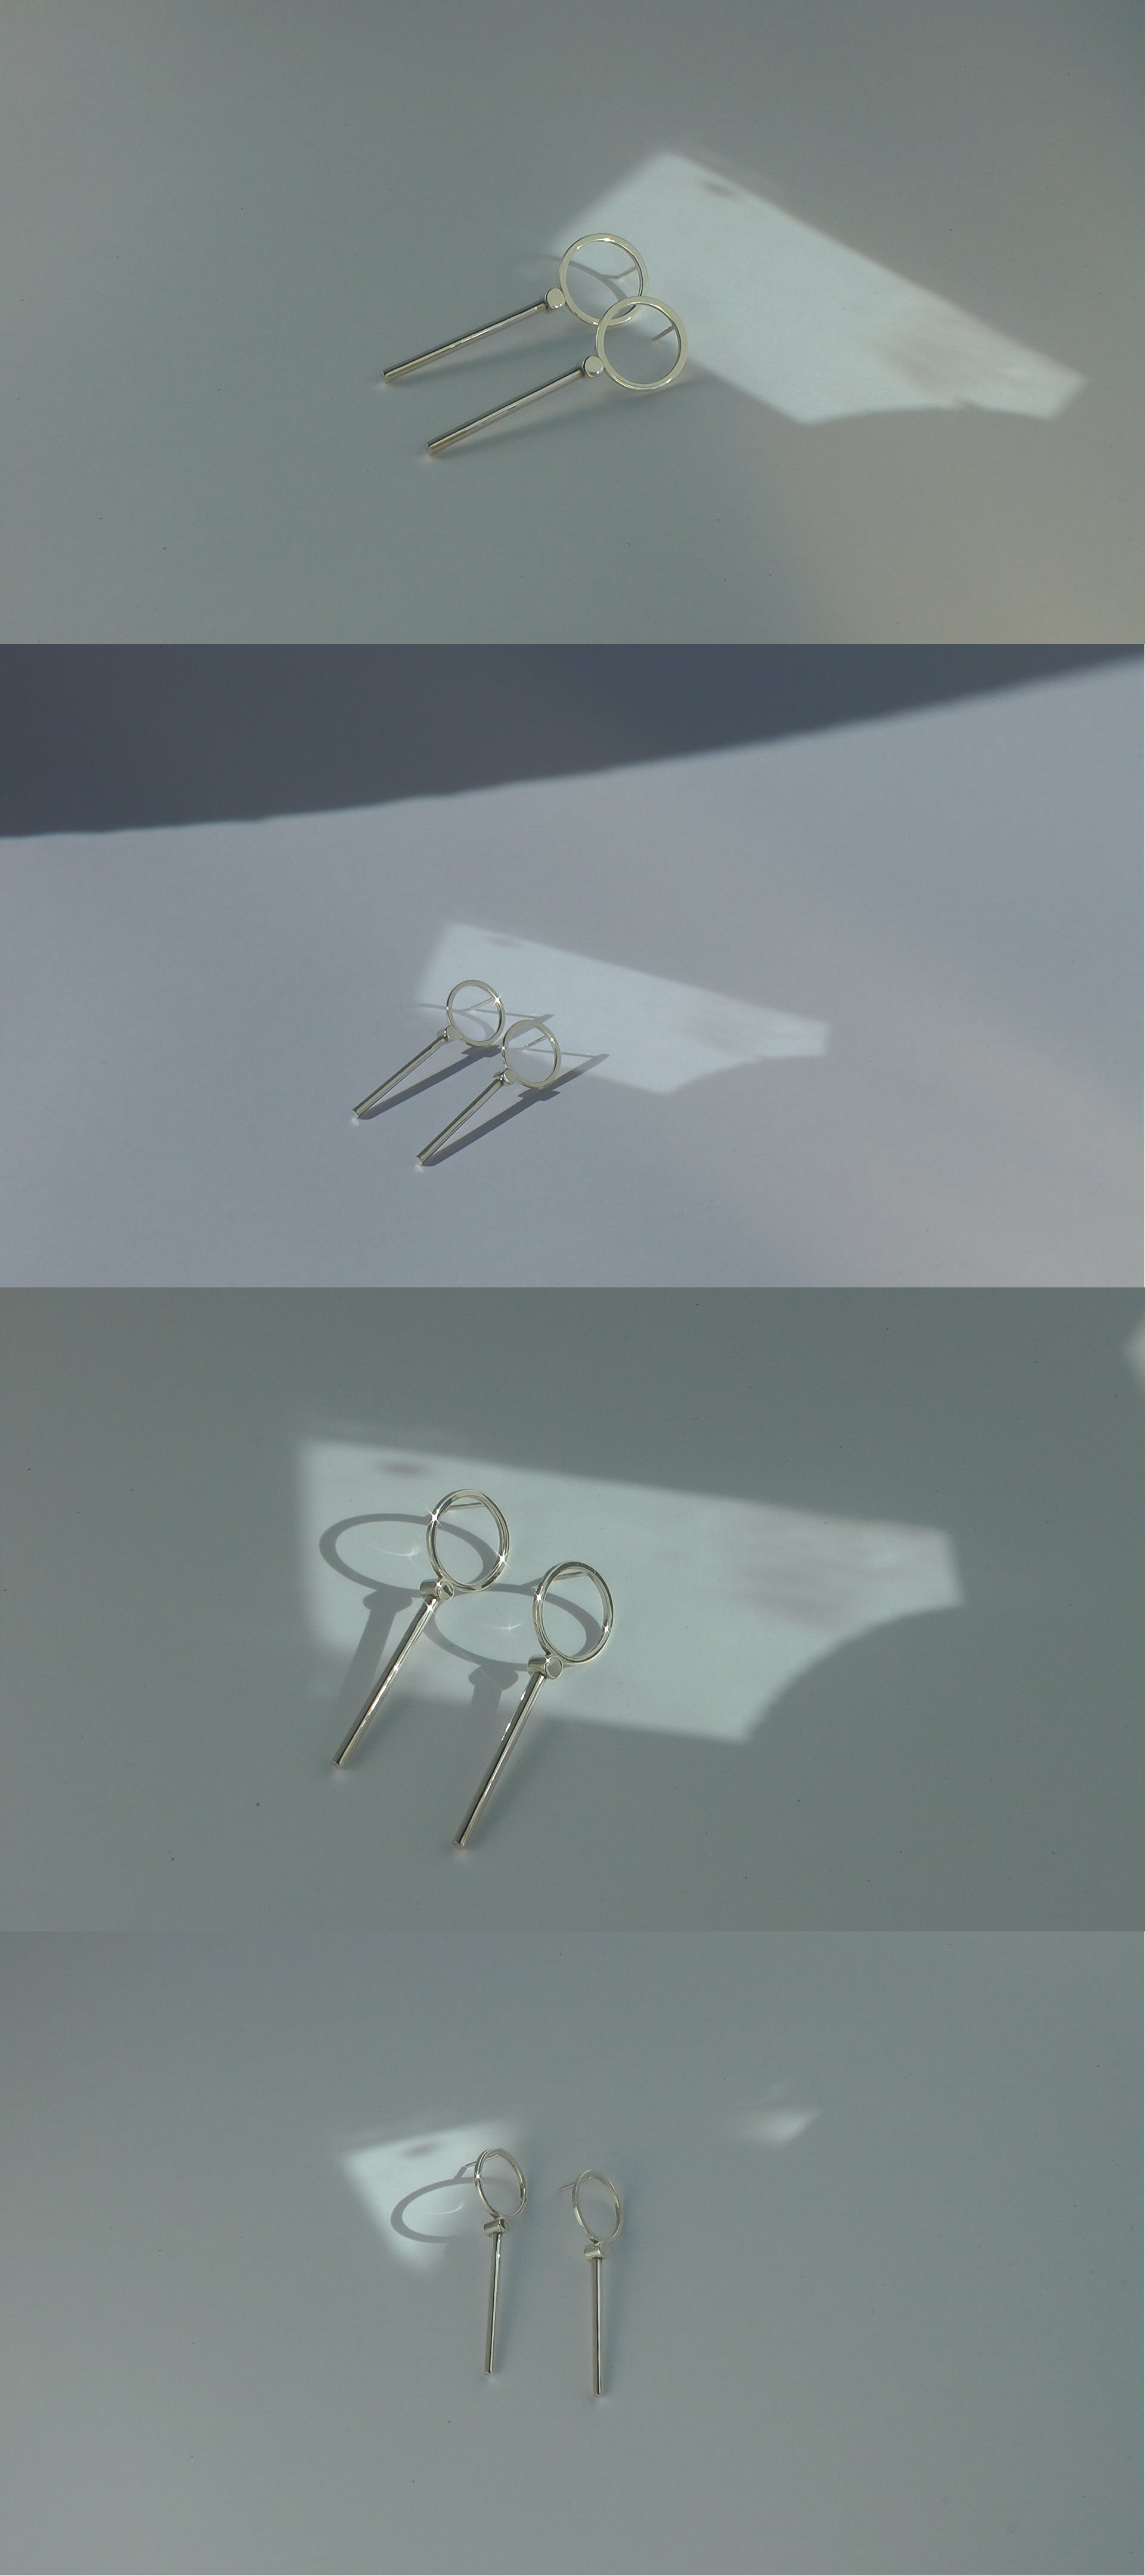 Image of Edition 1. Piece 10. Earrings  <font color="#996666"> / ON SALE / WAS $250</font>   